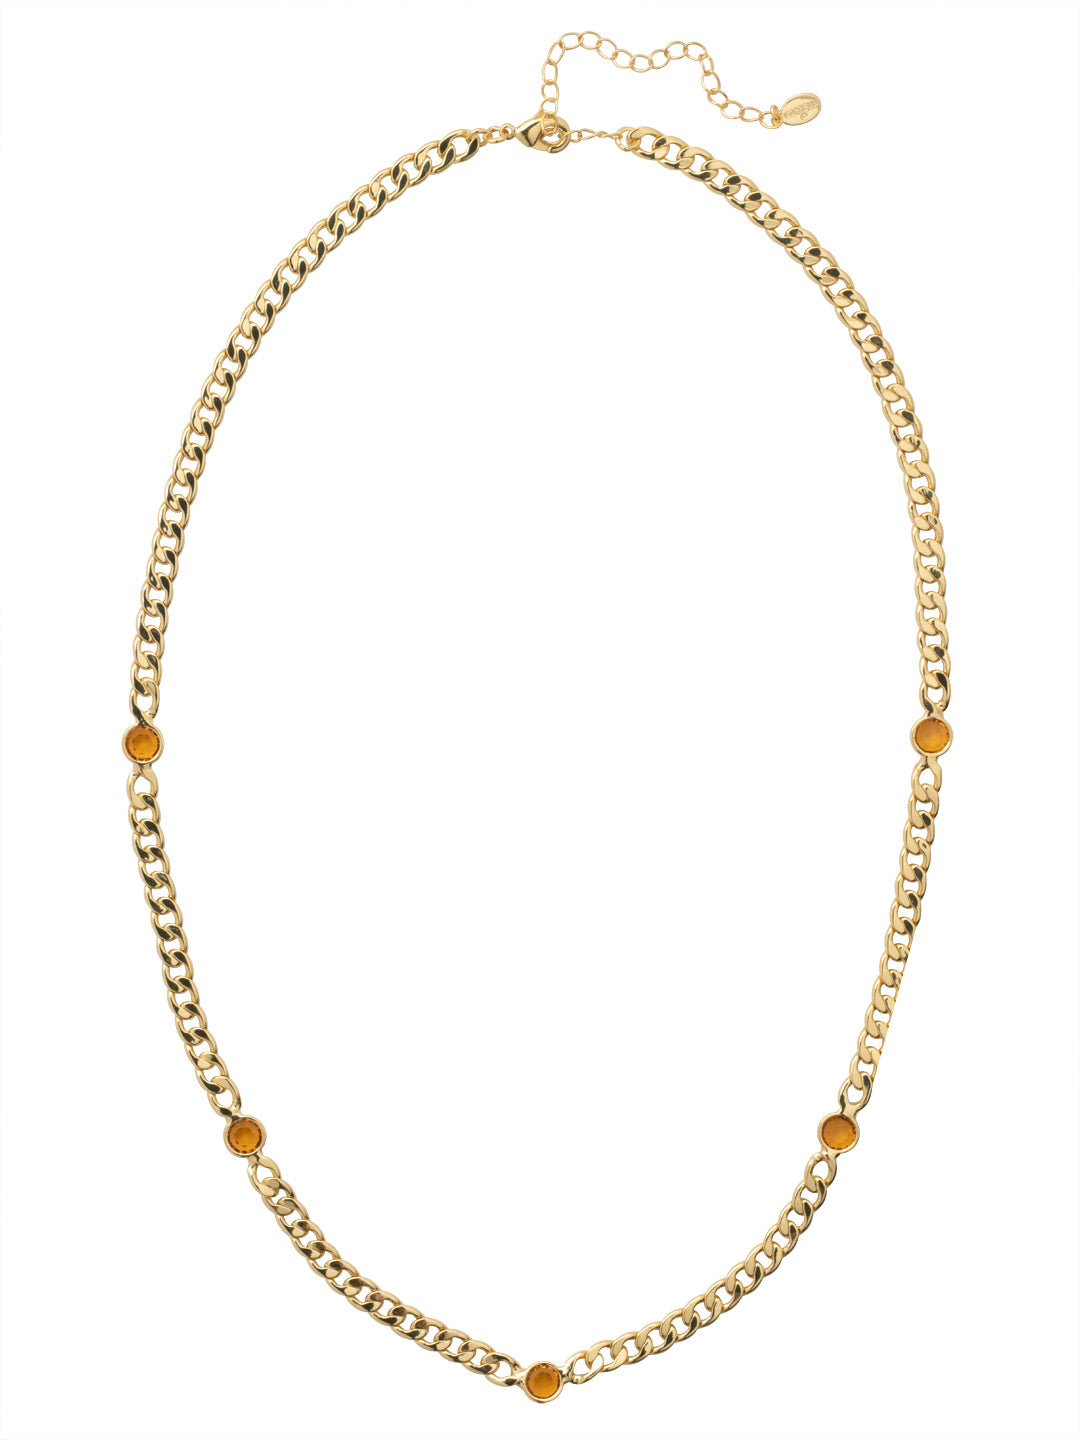 Dewdrop Long Necklace - NFK2BGTOP - <p>The Dewdrop Long Necklace features clear cut channels along an adjustable curb chain, secured with a lobster claw clasp. From Sorrelli's Topaz collection in our Bright Gold-tone finish.</p>